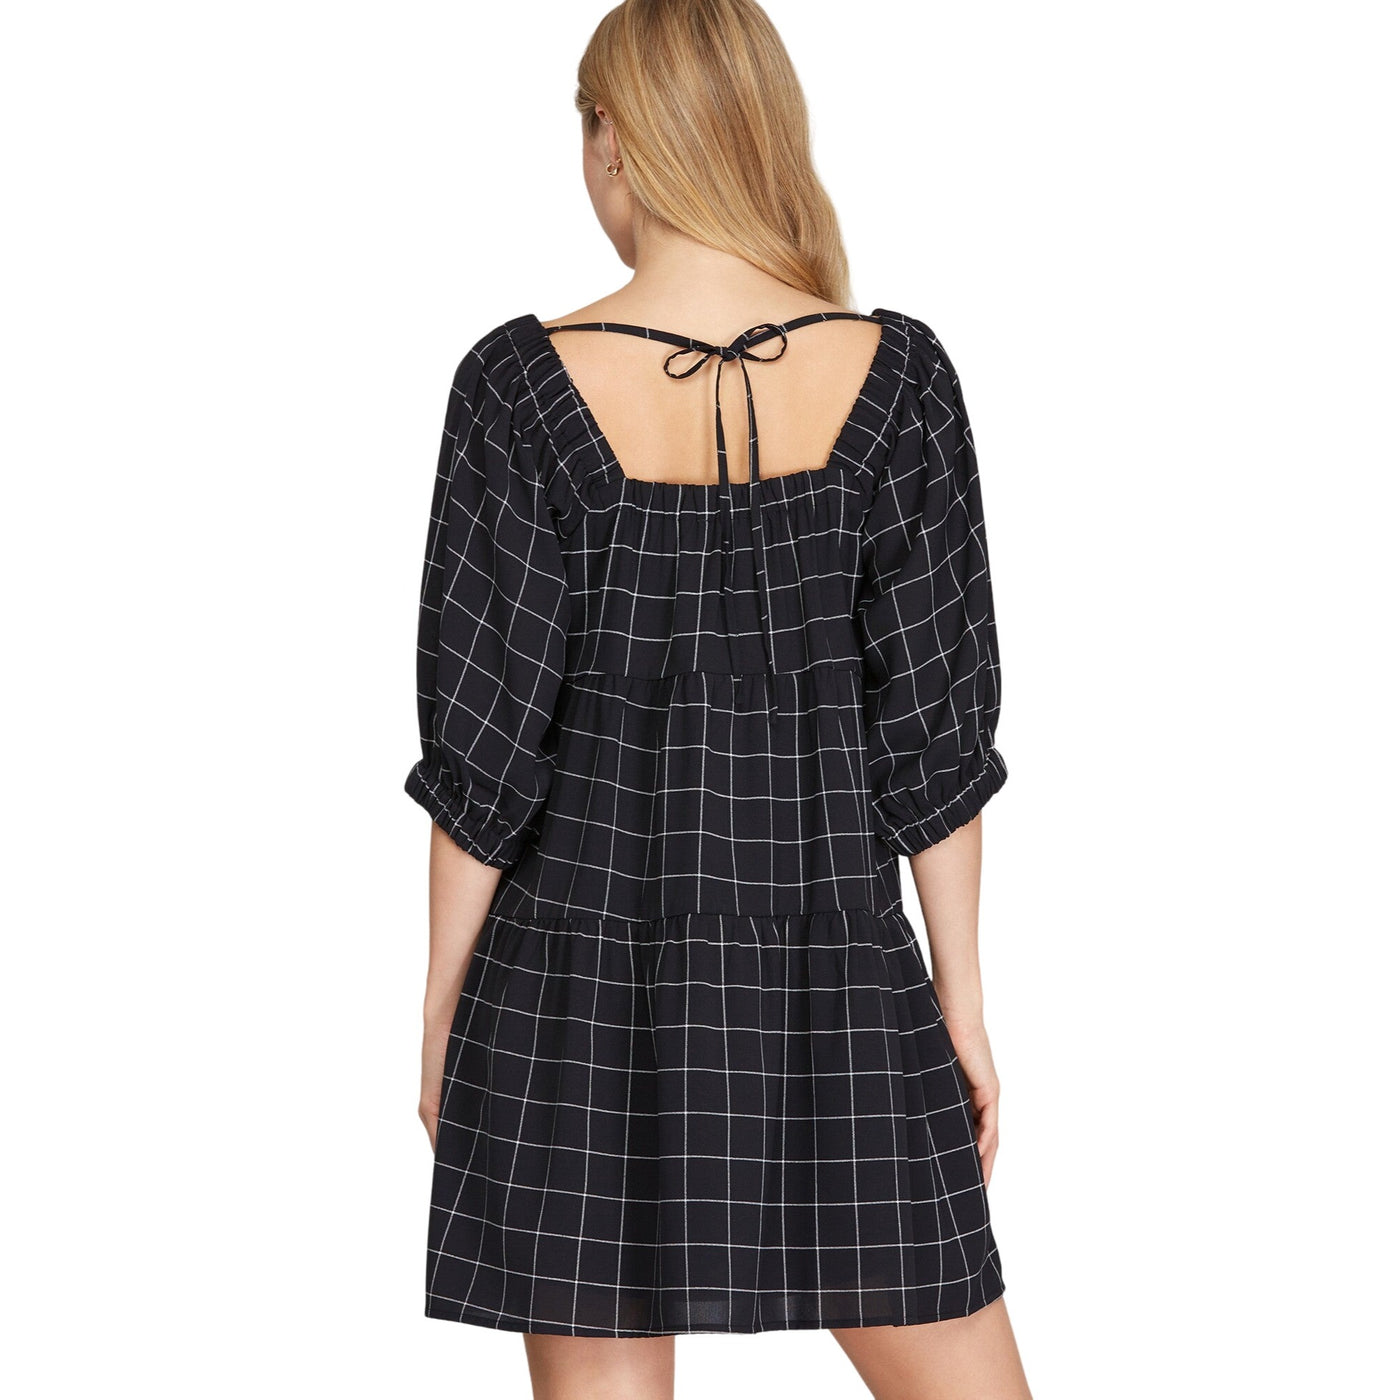 SHE + SKY Black Checkered Tiered Mini Dress with Back Tie SS9795